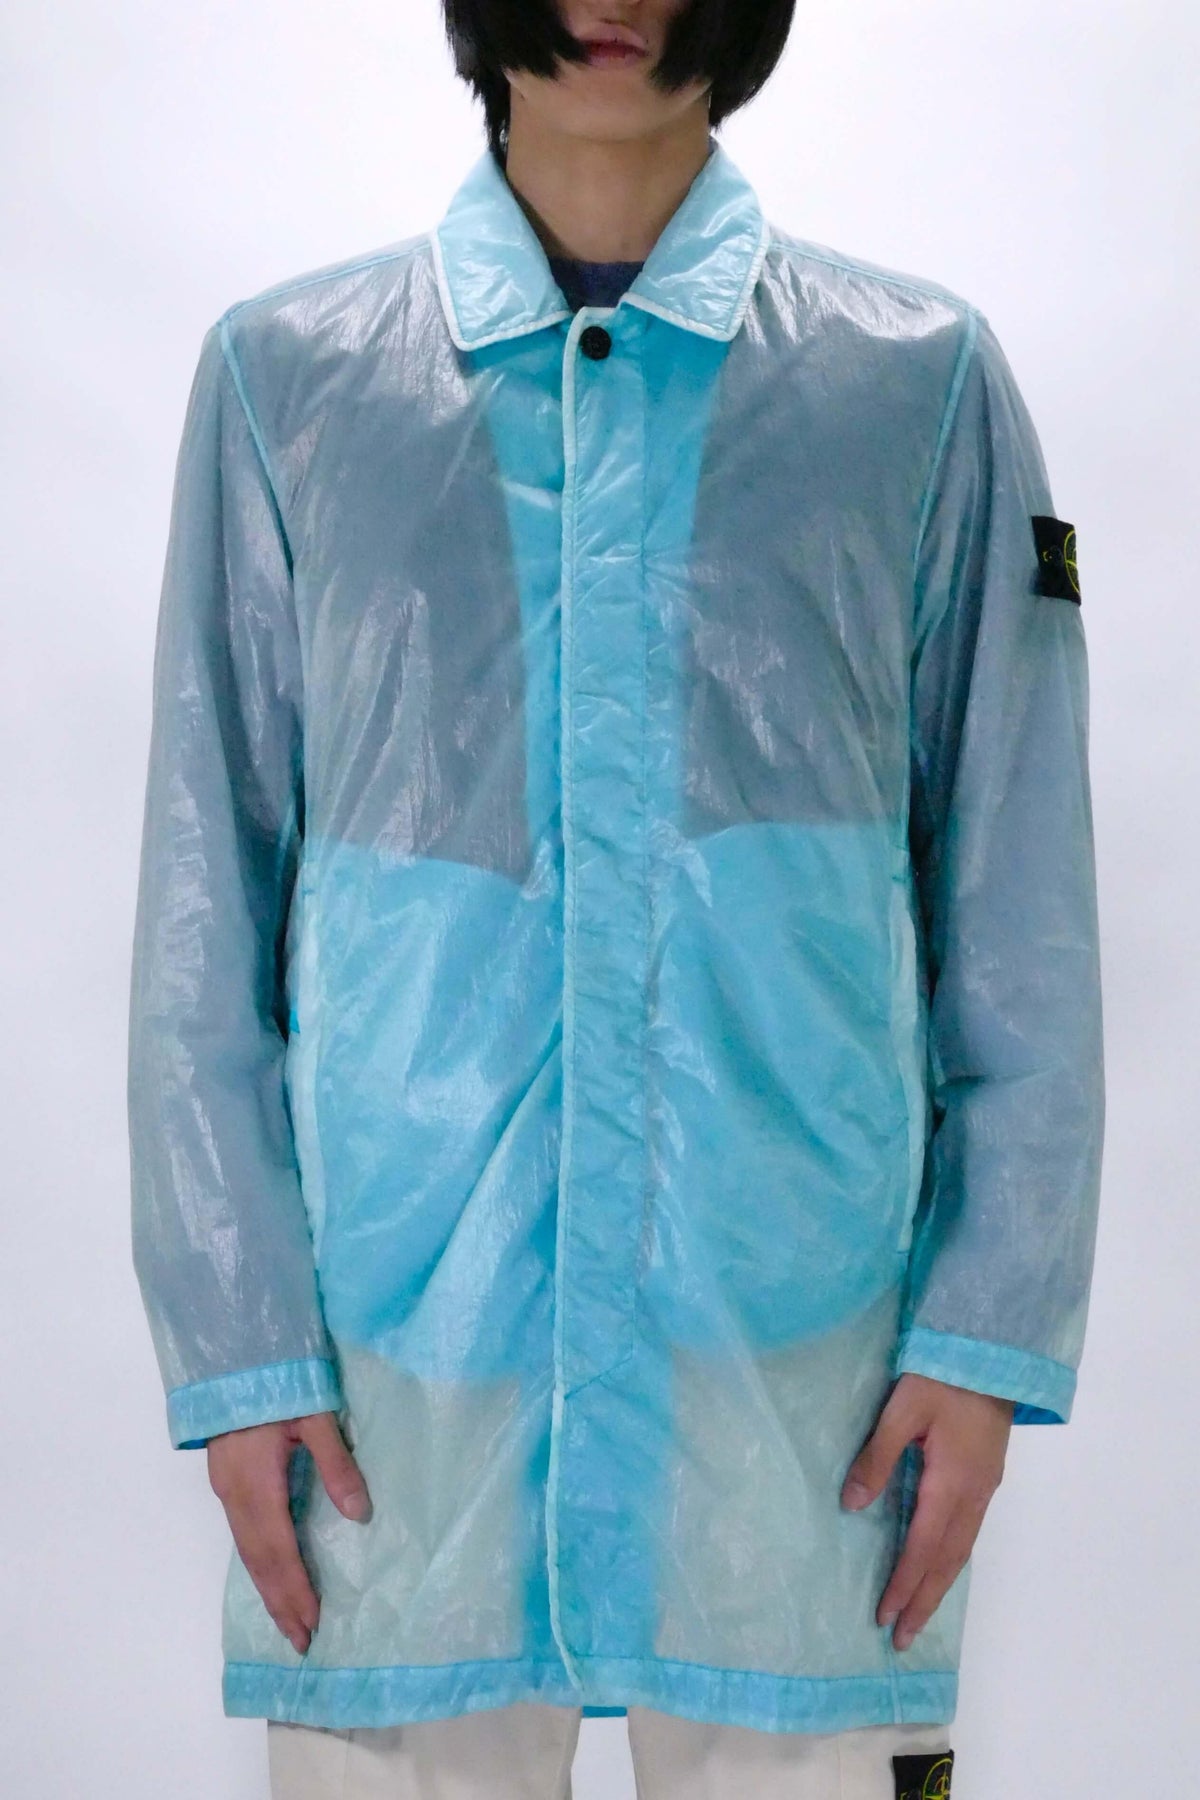 Stone Island 70534 Lucido-TC_Packable Jacket - TURQUOISE - Due West